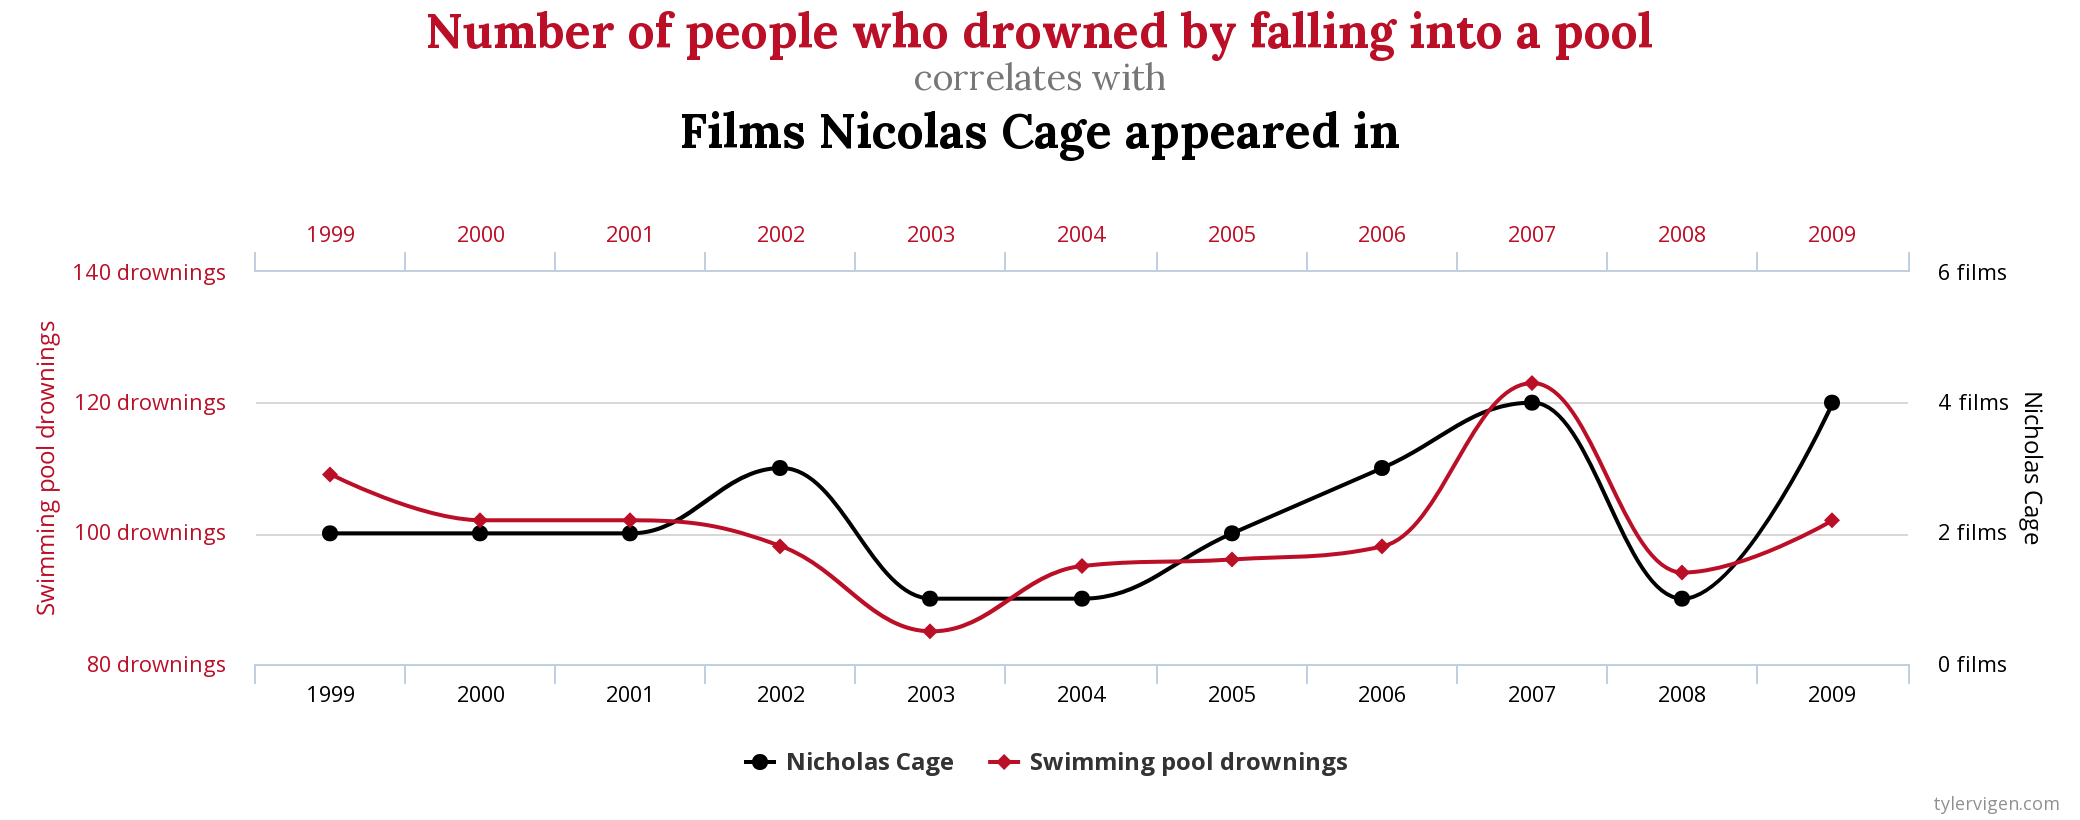 Is Nicholas Cage a secret pool murderer? Our lawyers say 'No' for the sake of avoiding libel.